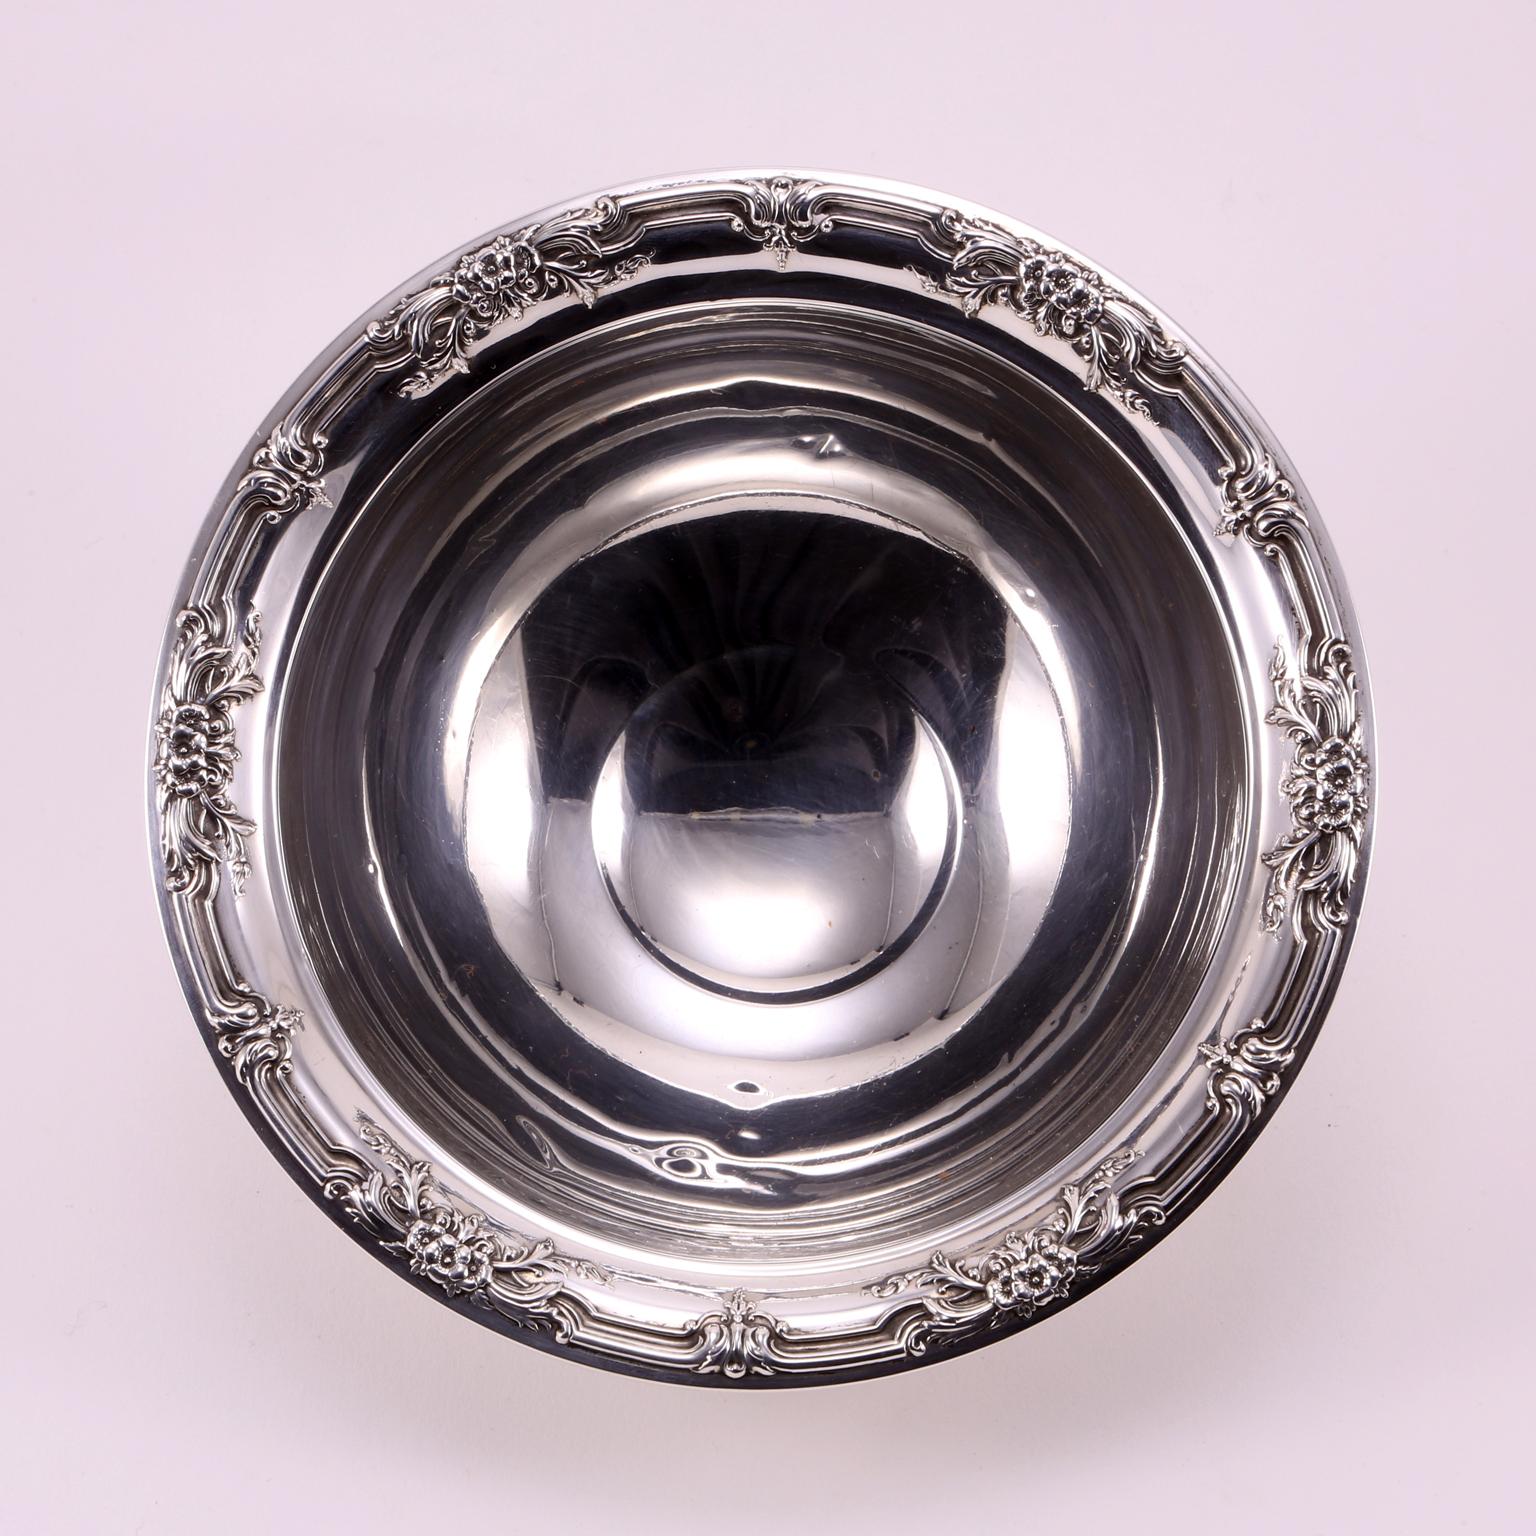 19th Century Silver Bowl Decorated with Flowers and Branches (Spätes 19. Jahrhundert) im Angebot